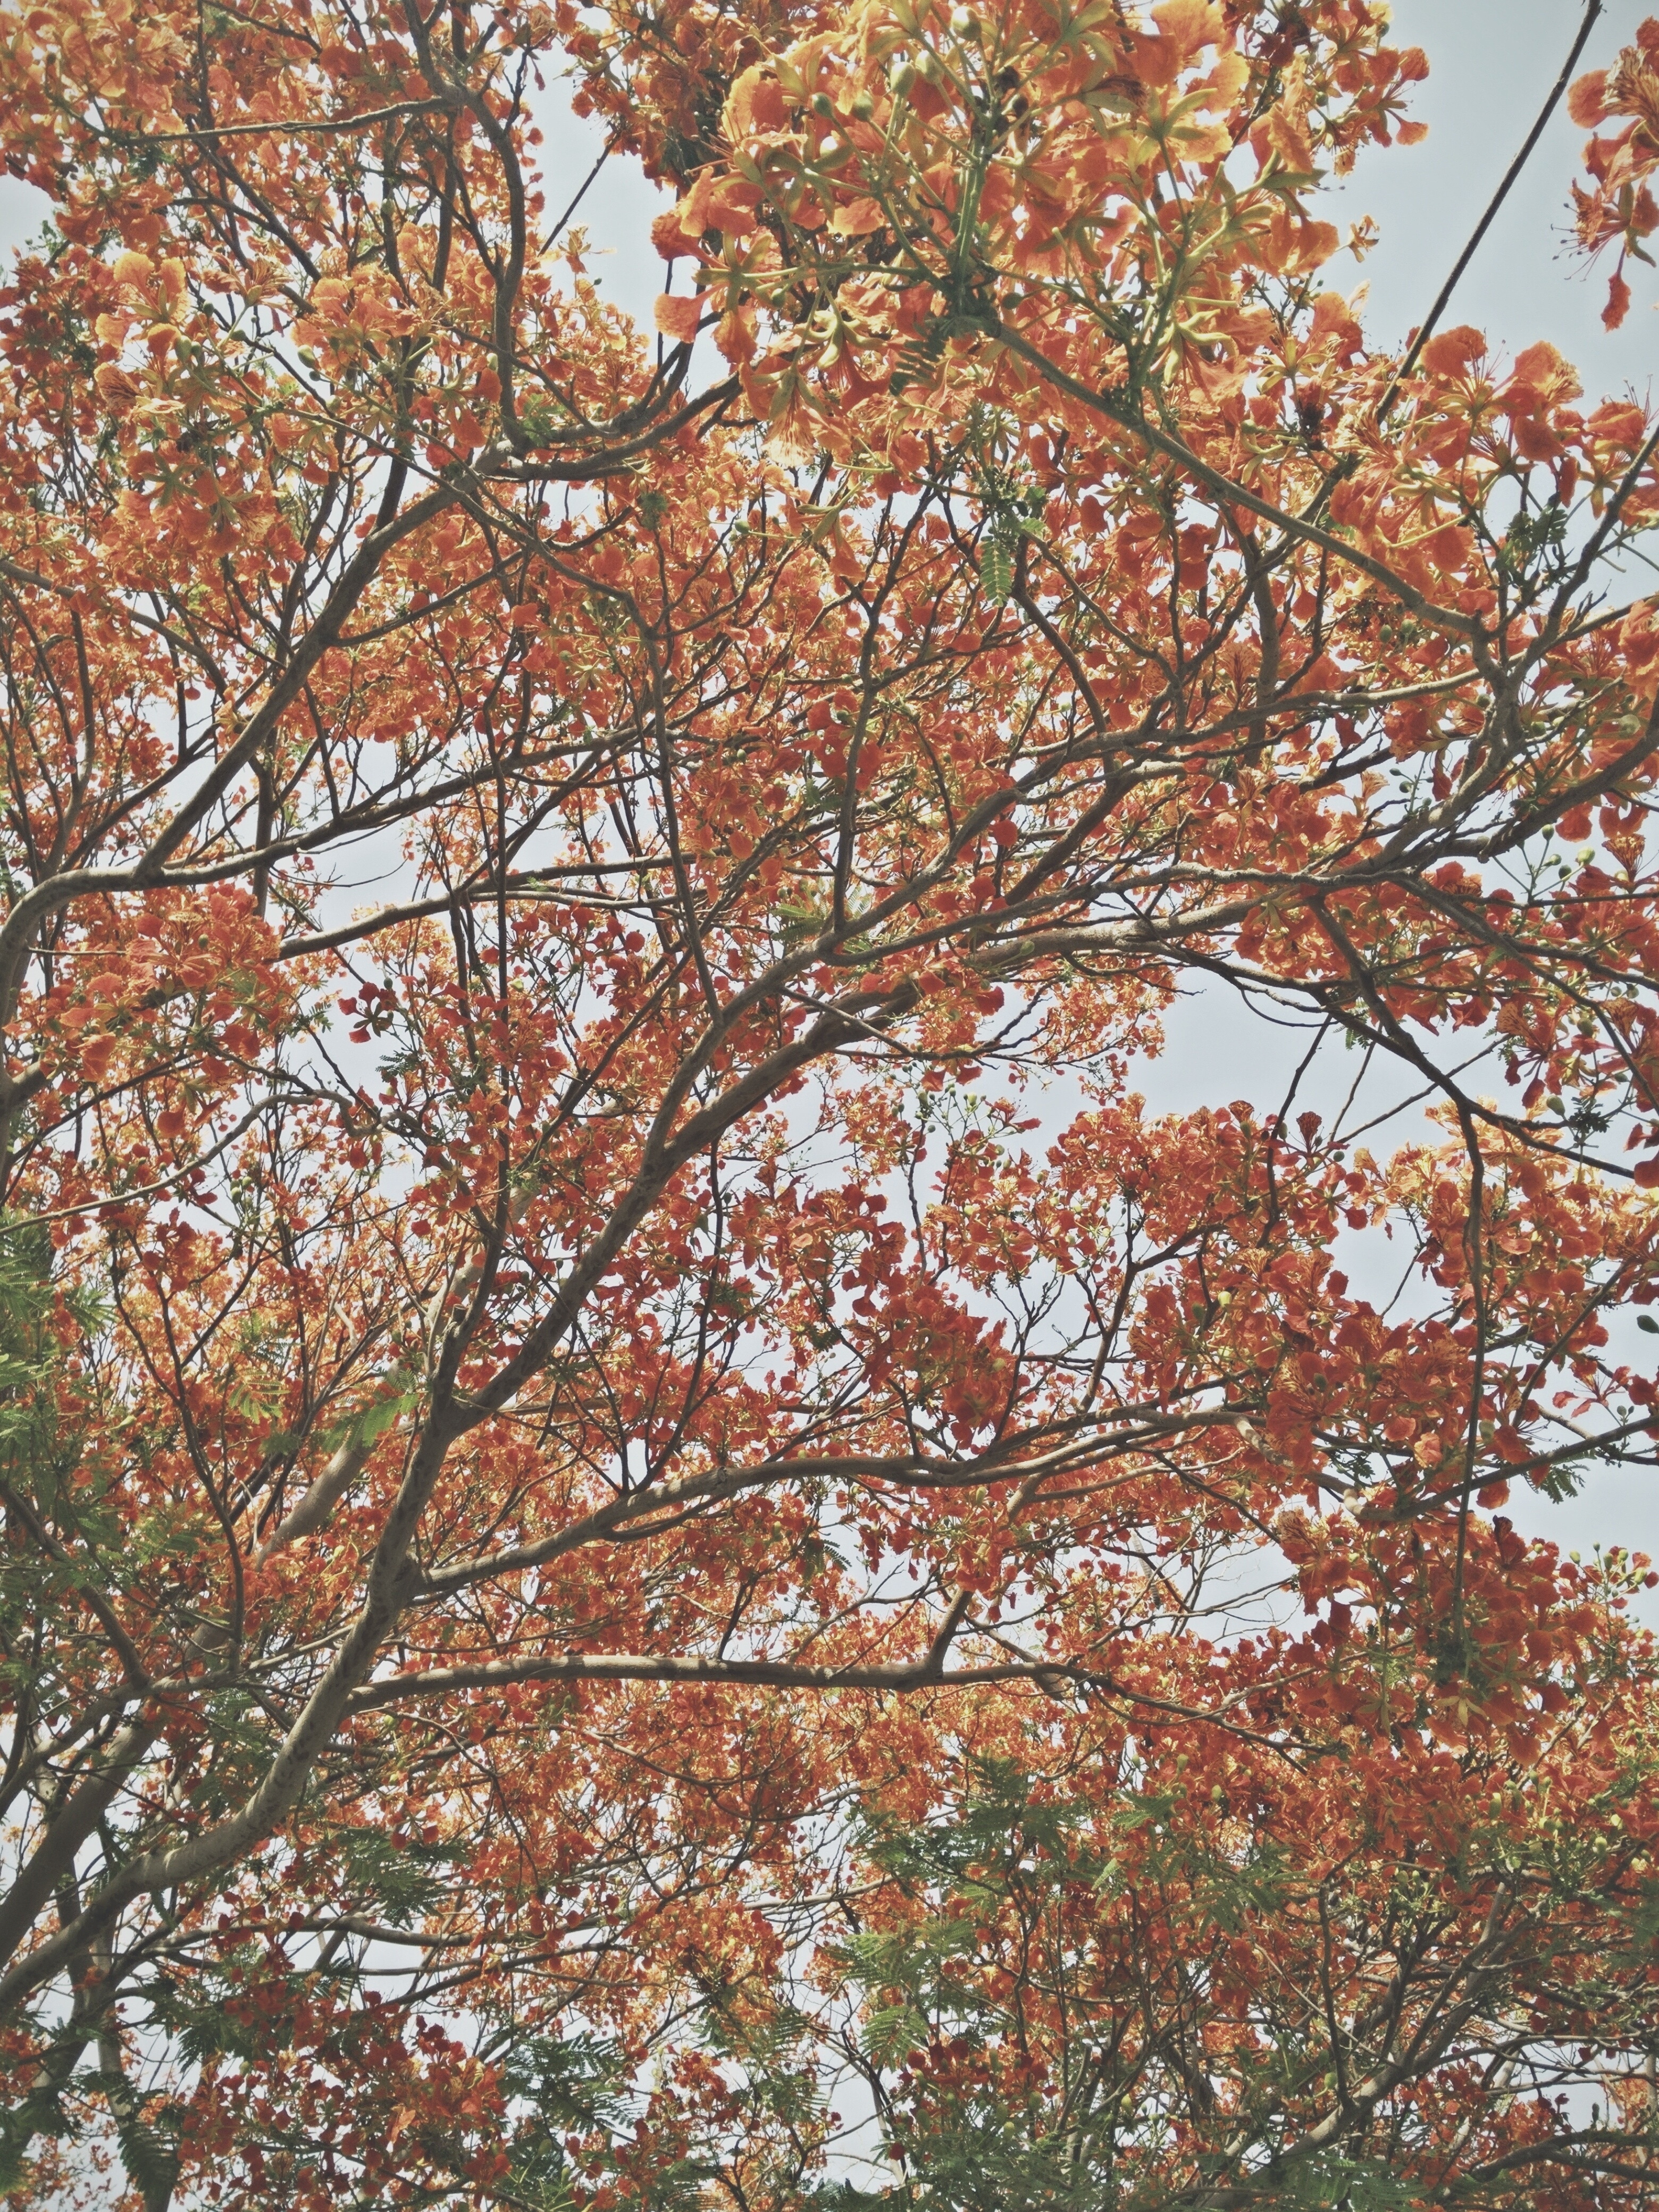 tree with orange and red leaves